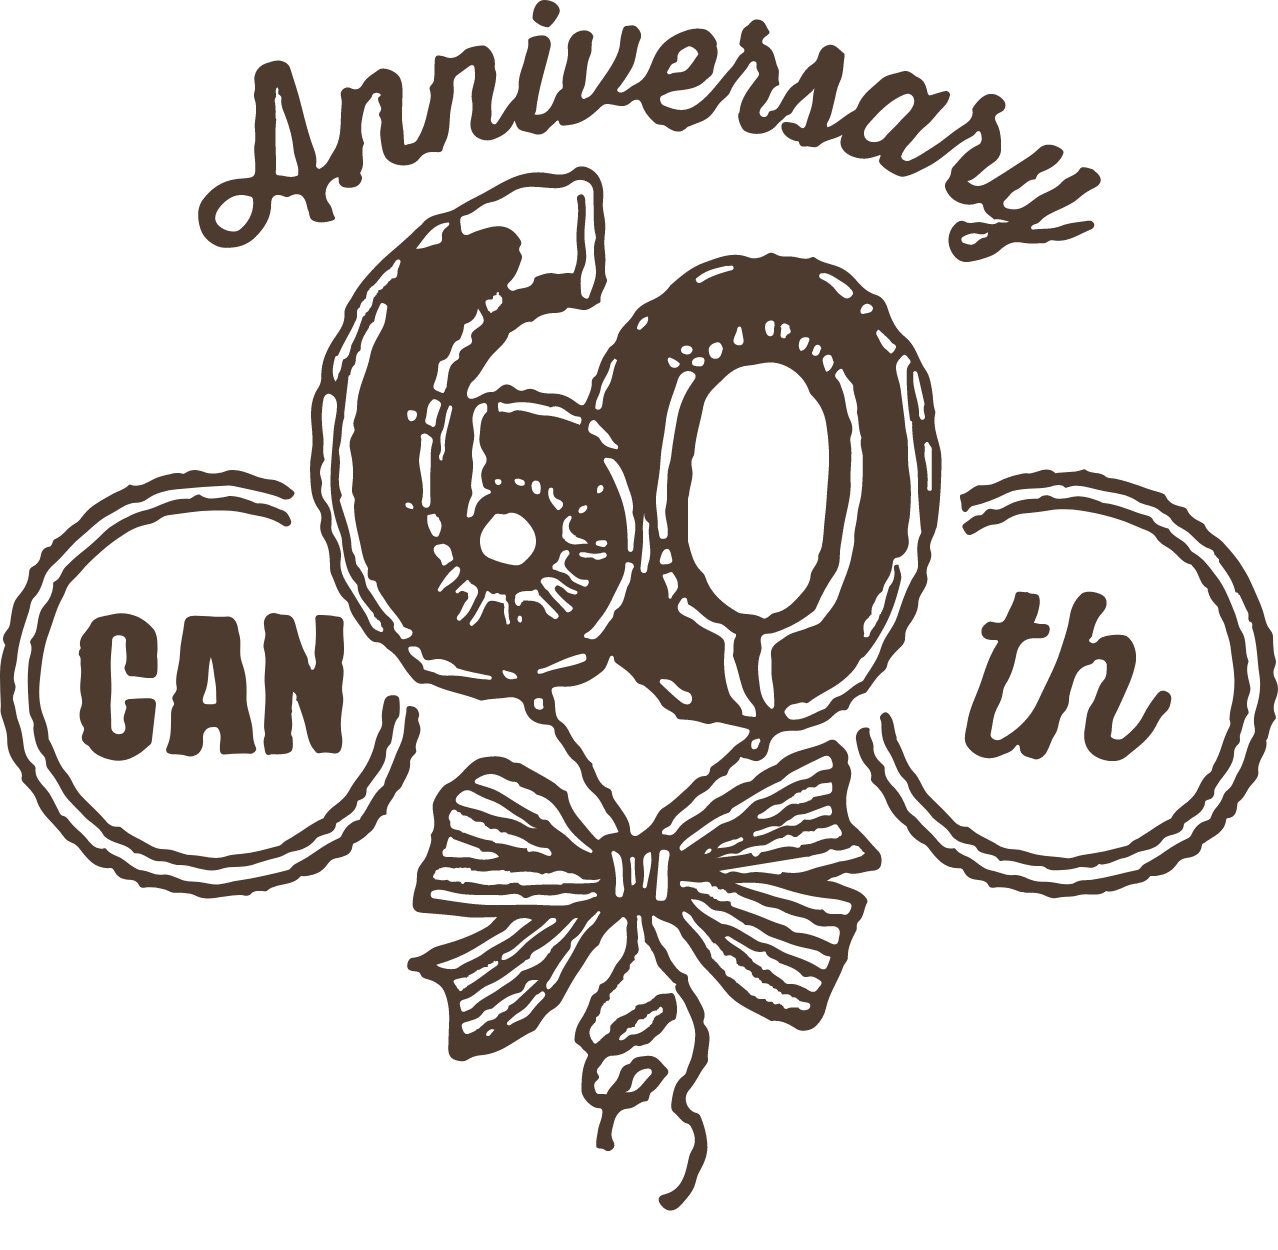 can 60th anniversary